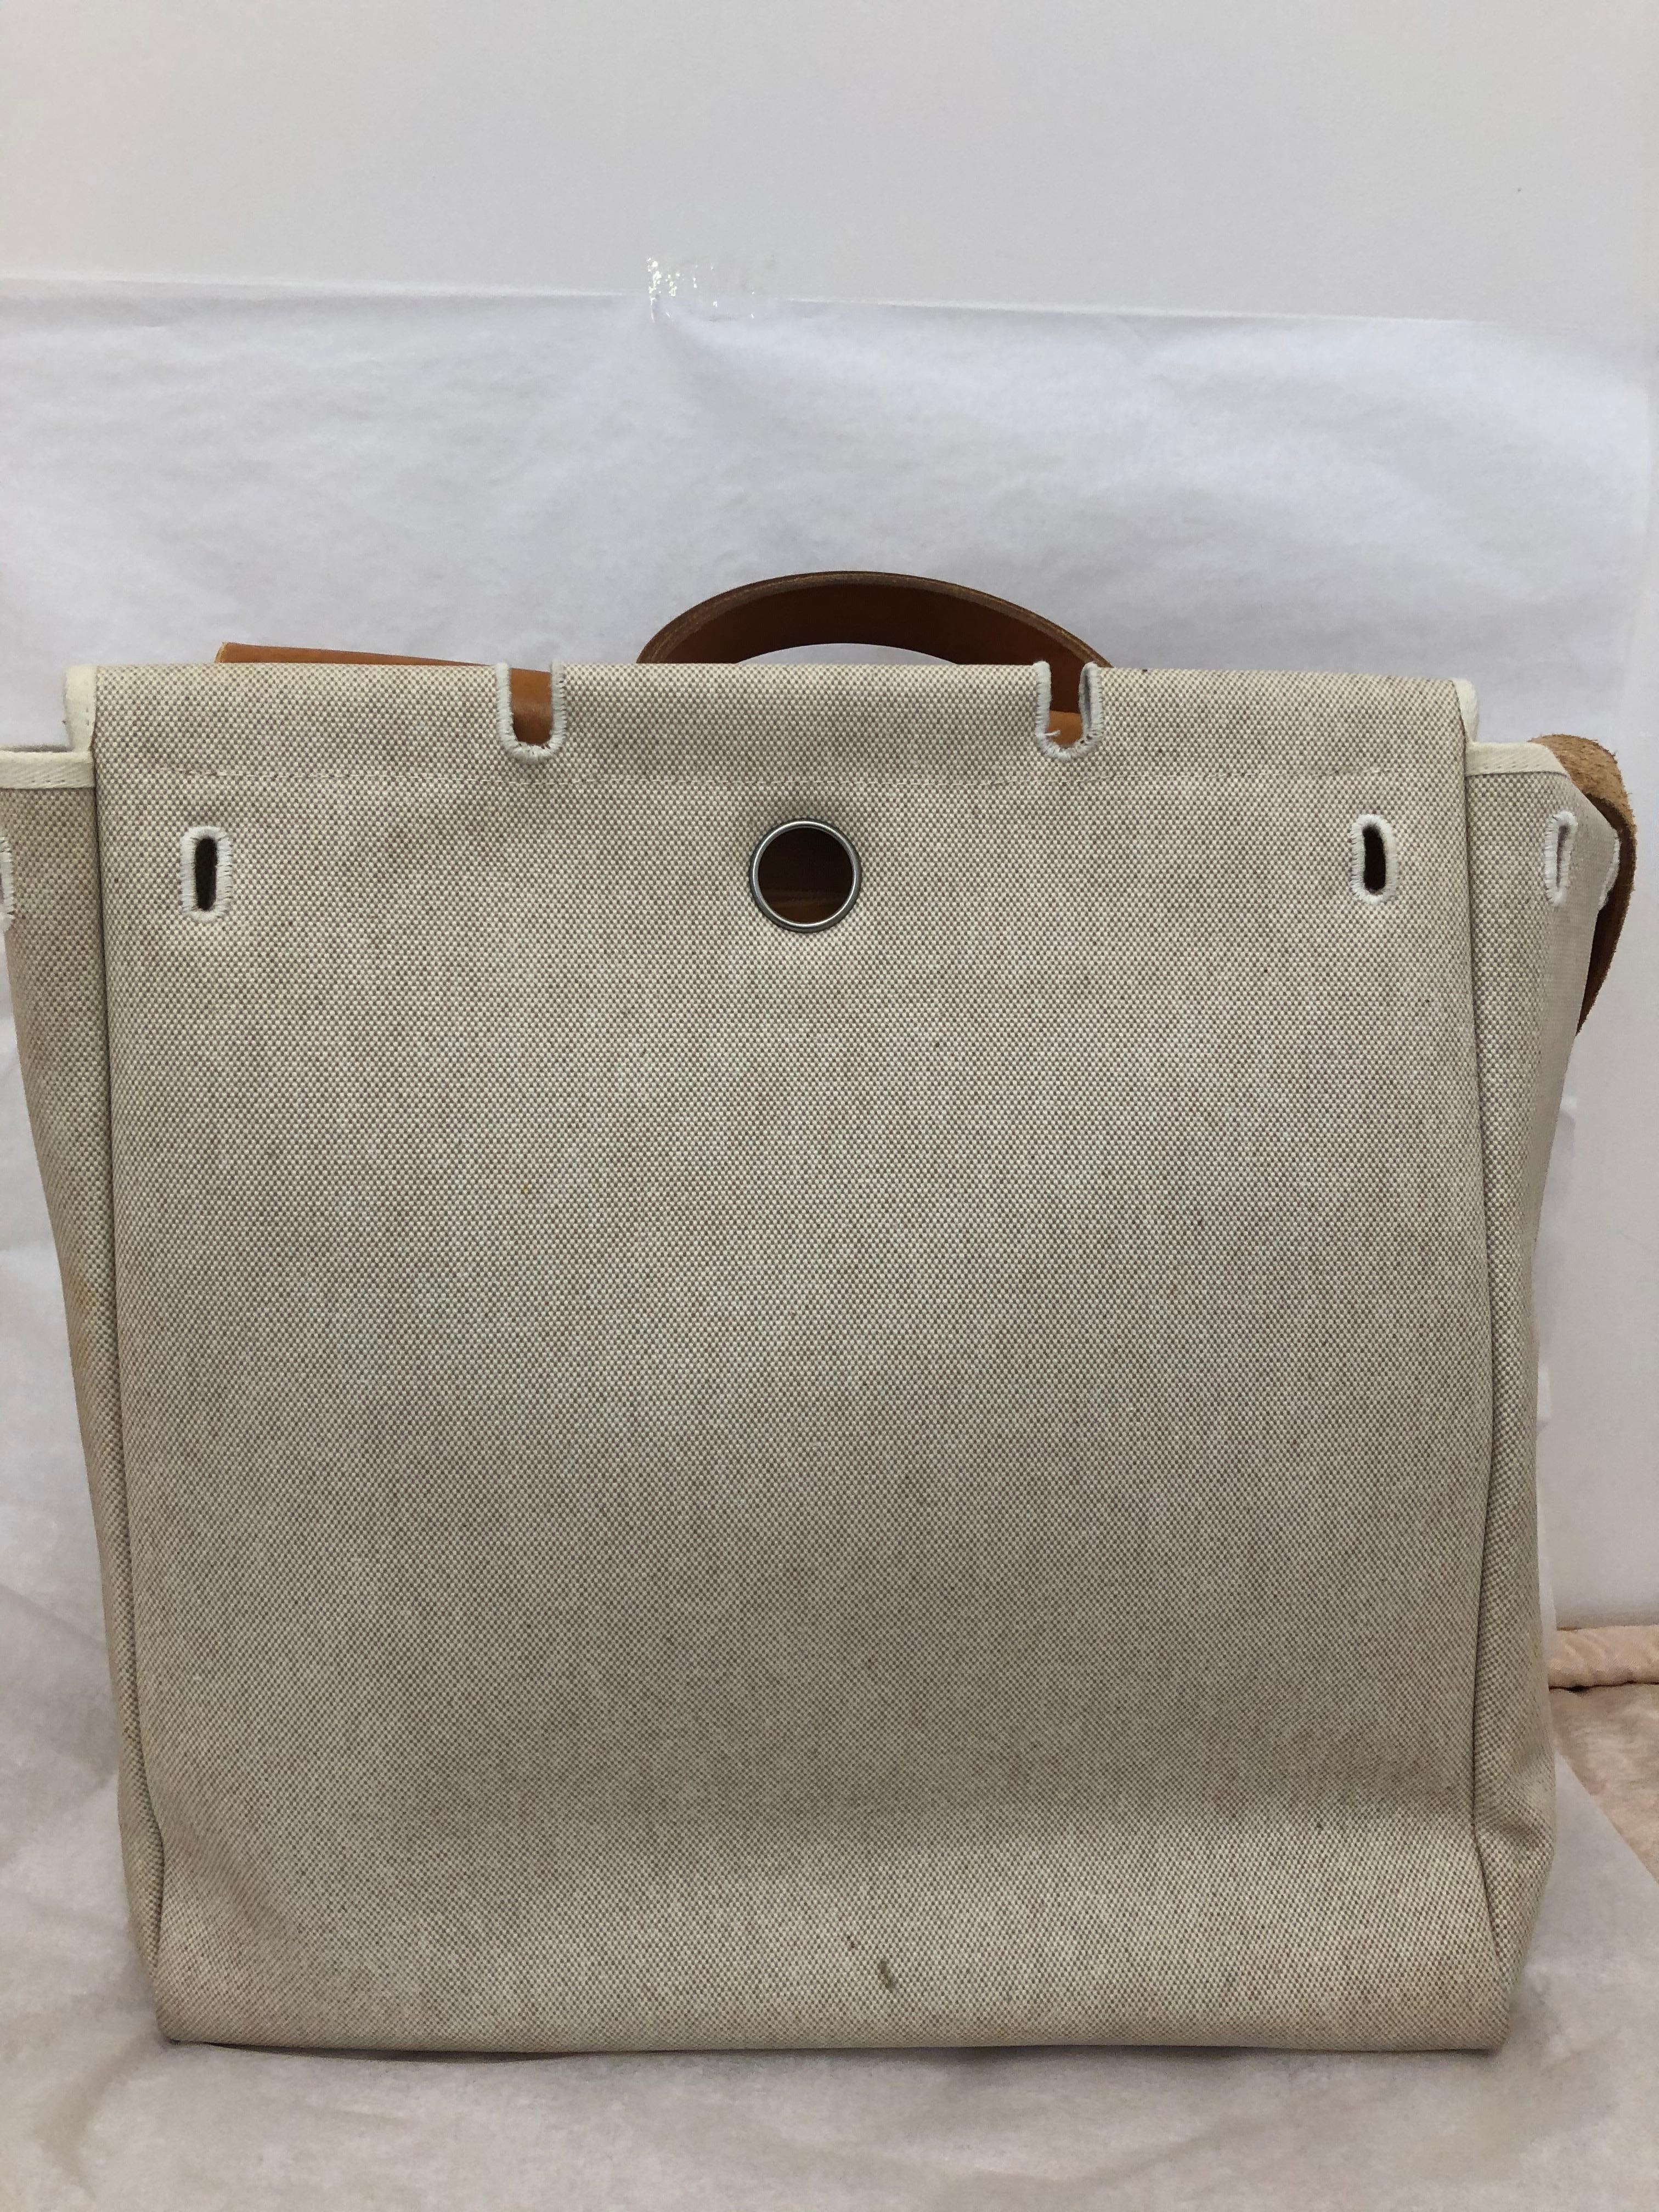 1998 HERMES Large Beige Canvas and Tan Leather Herbag w/Canvas Protector 5